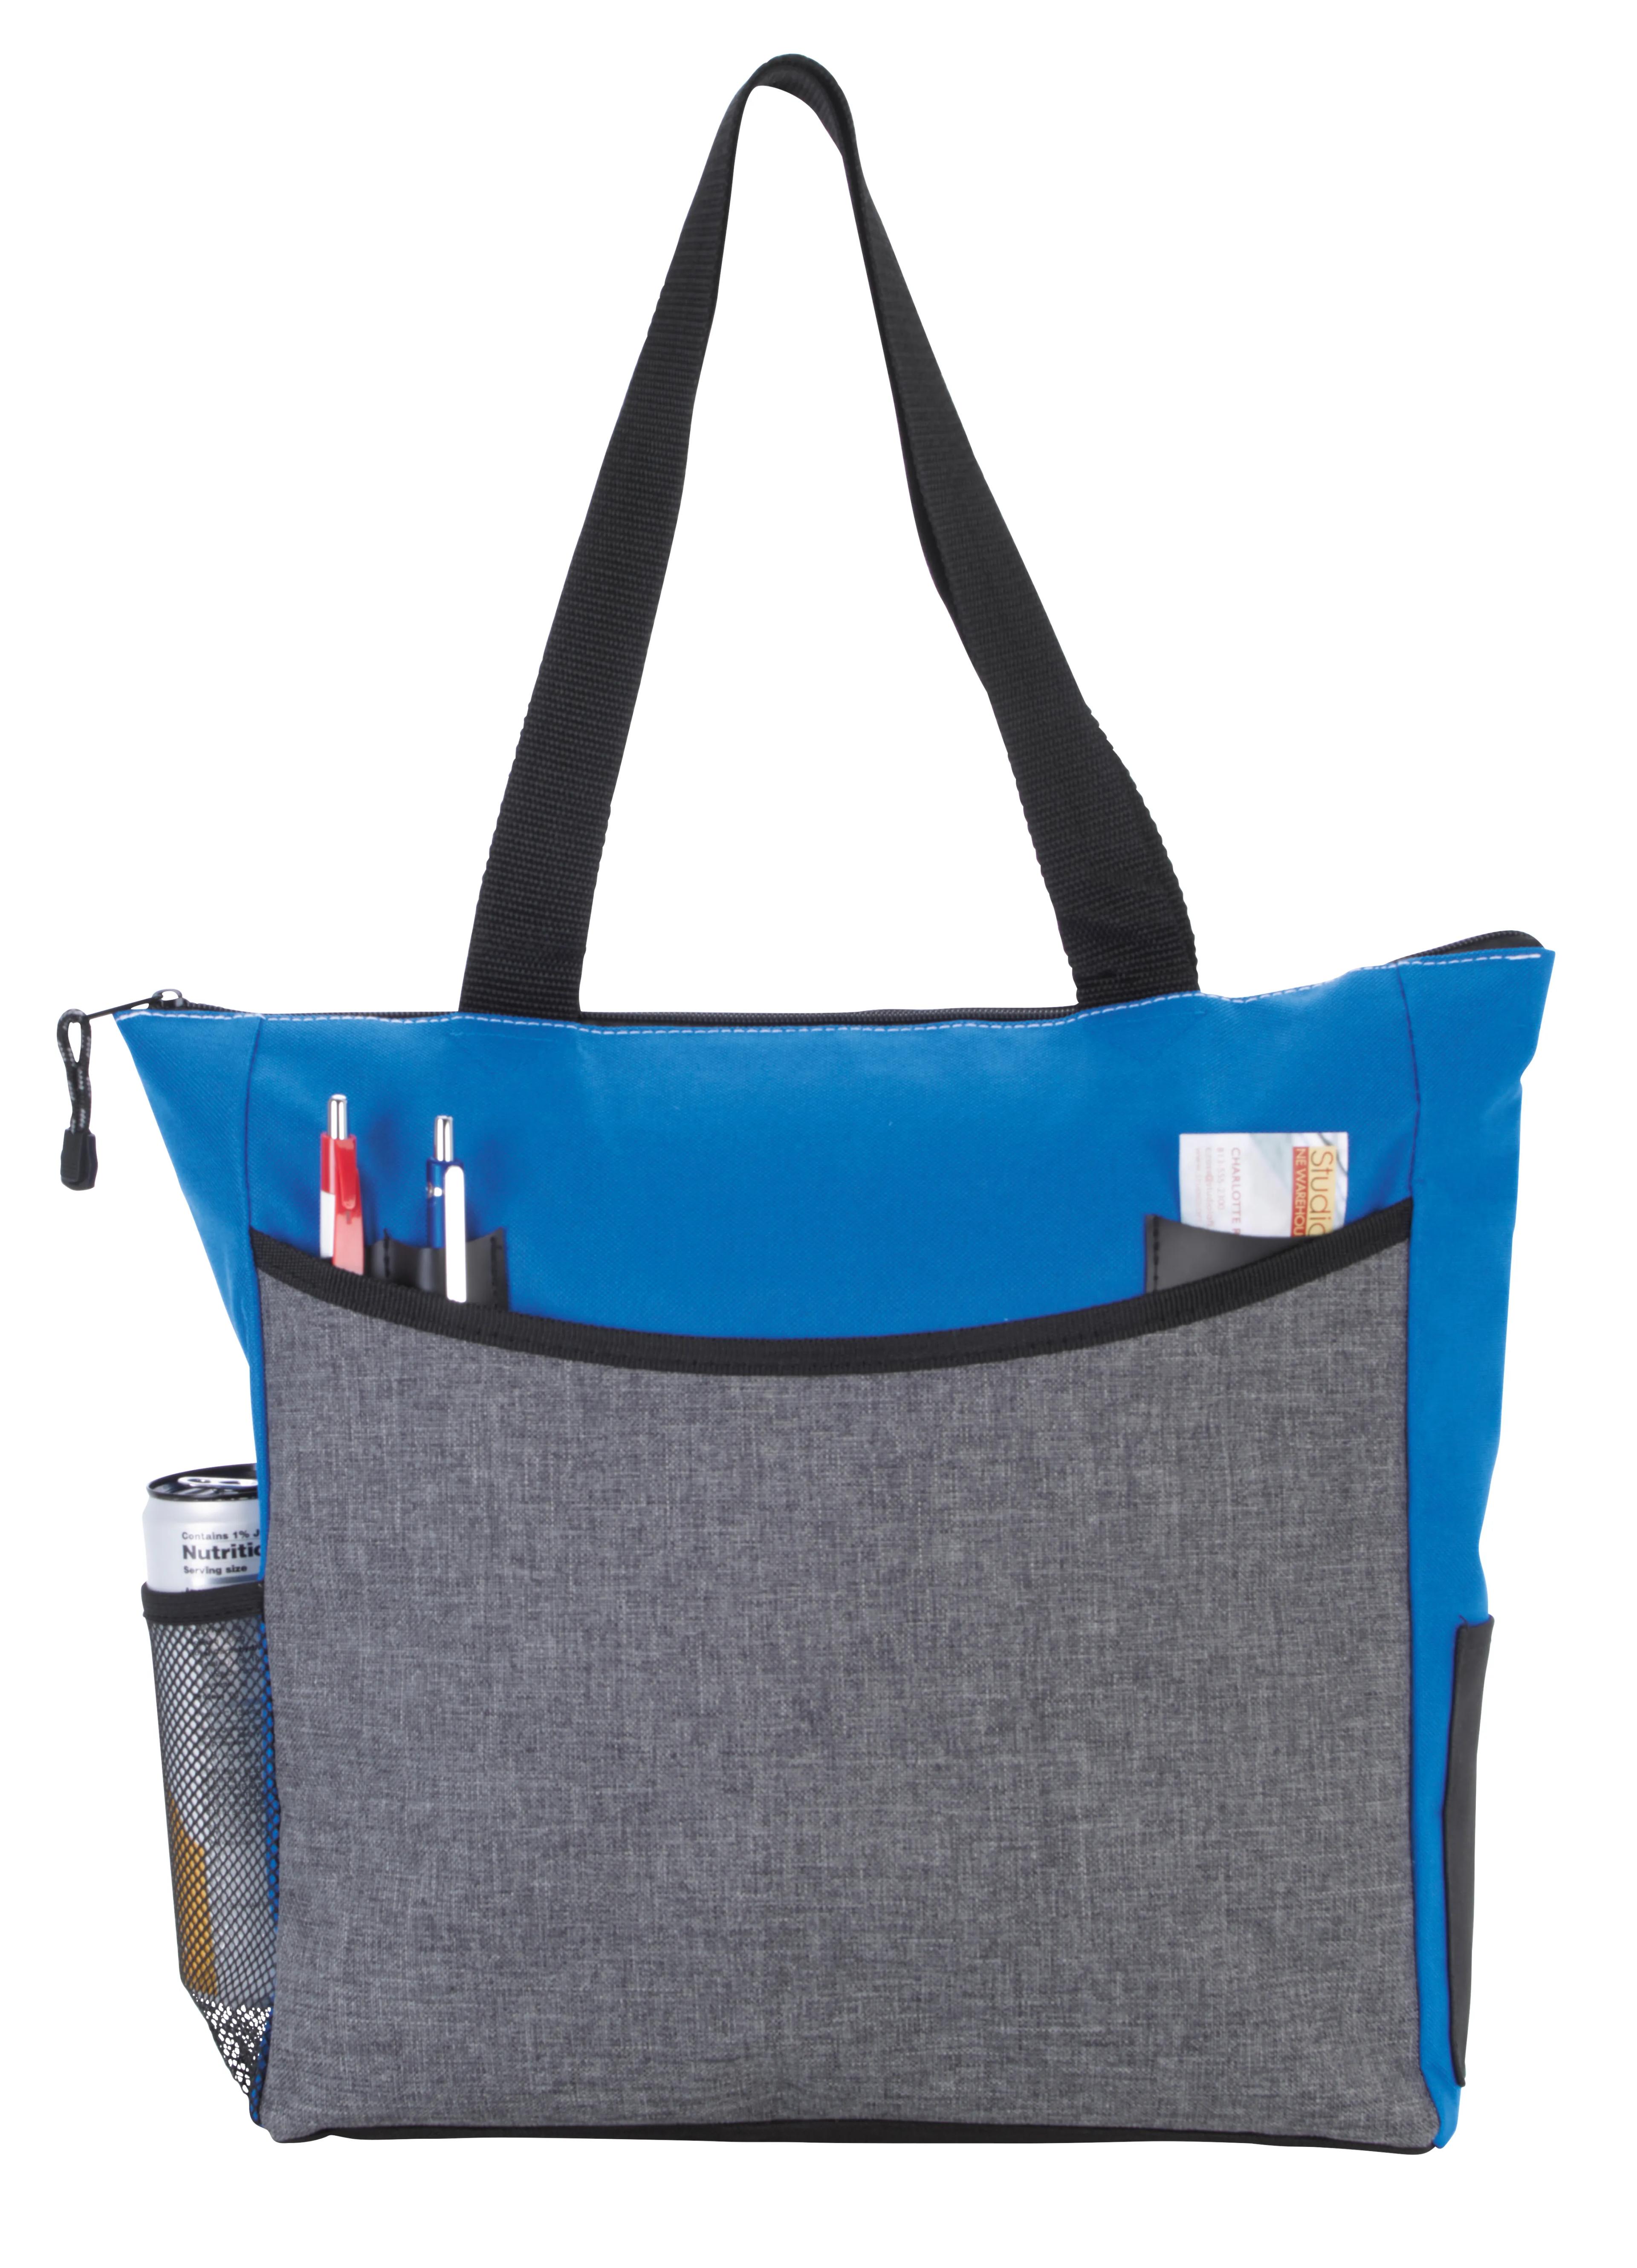 Two-Tone TranSport It Tote 20 of 29